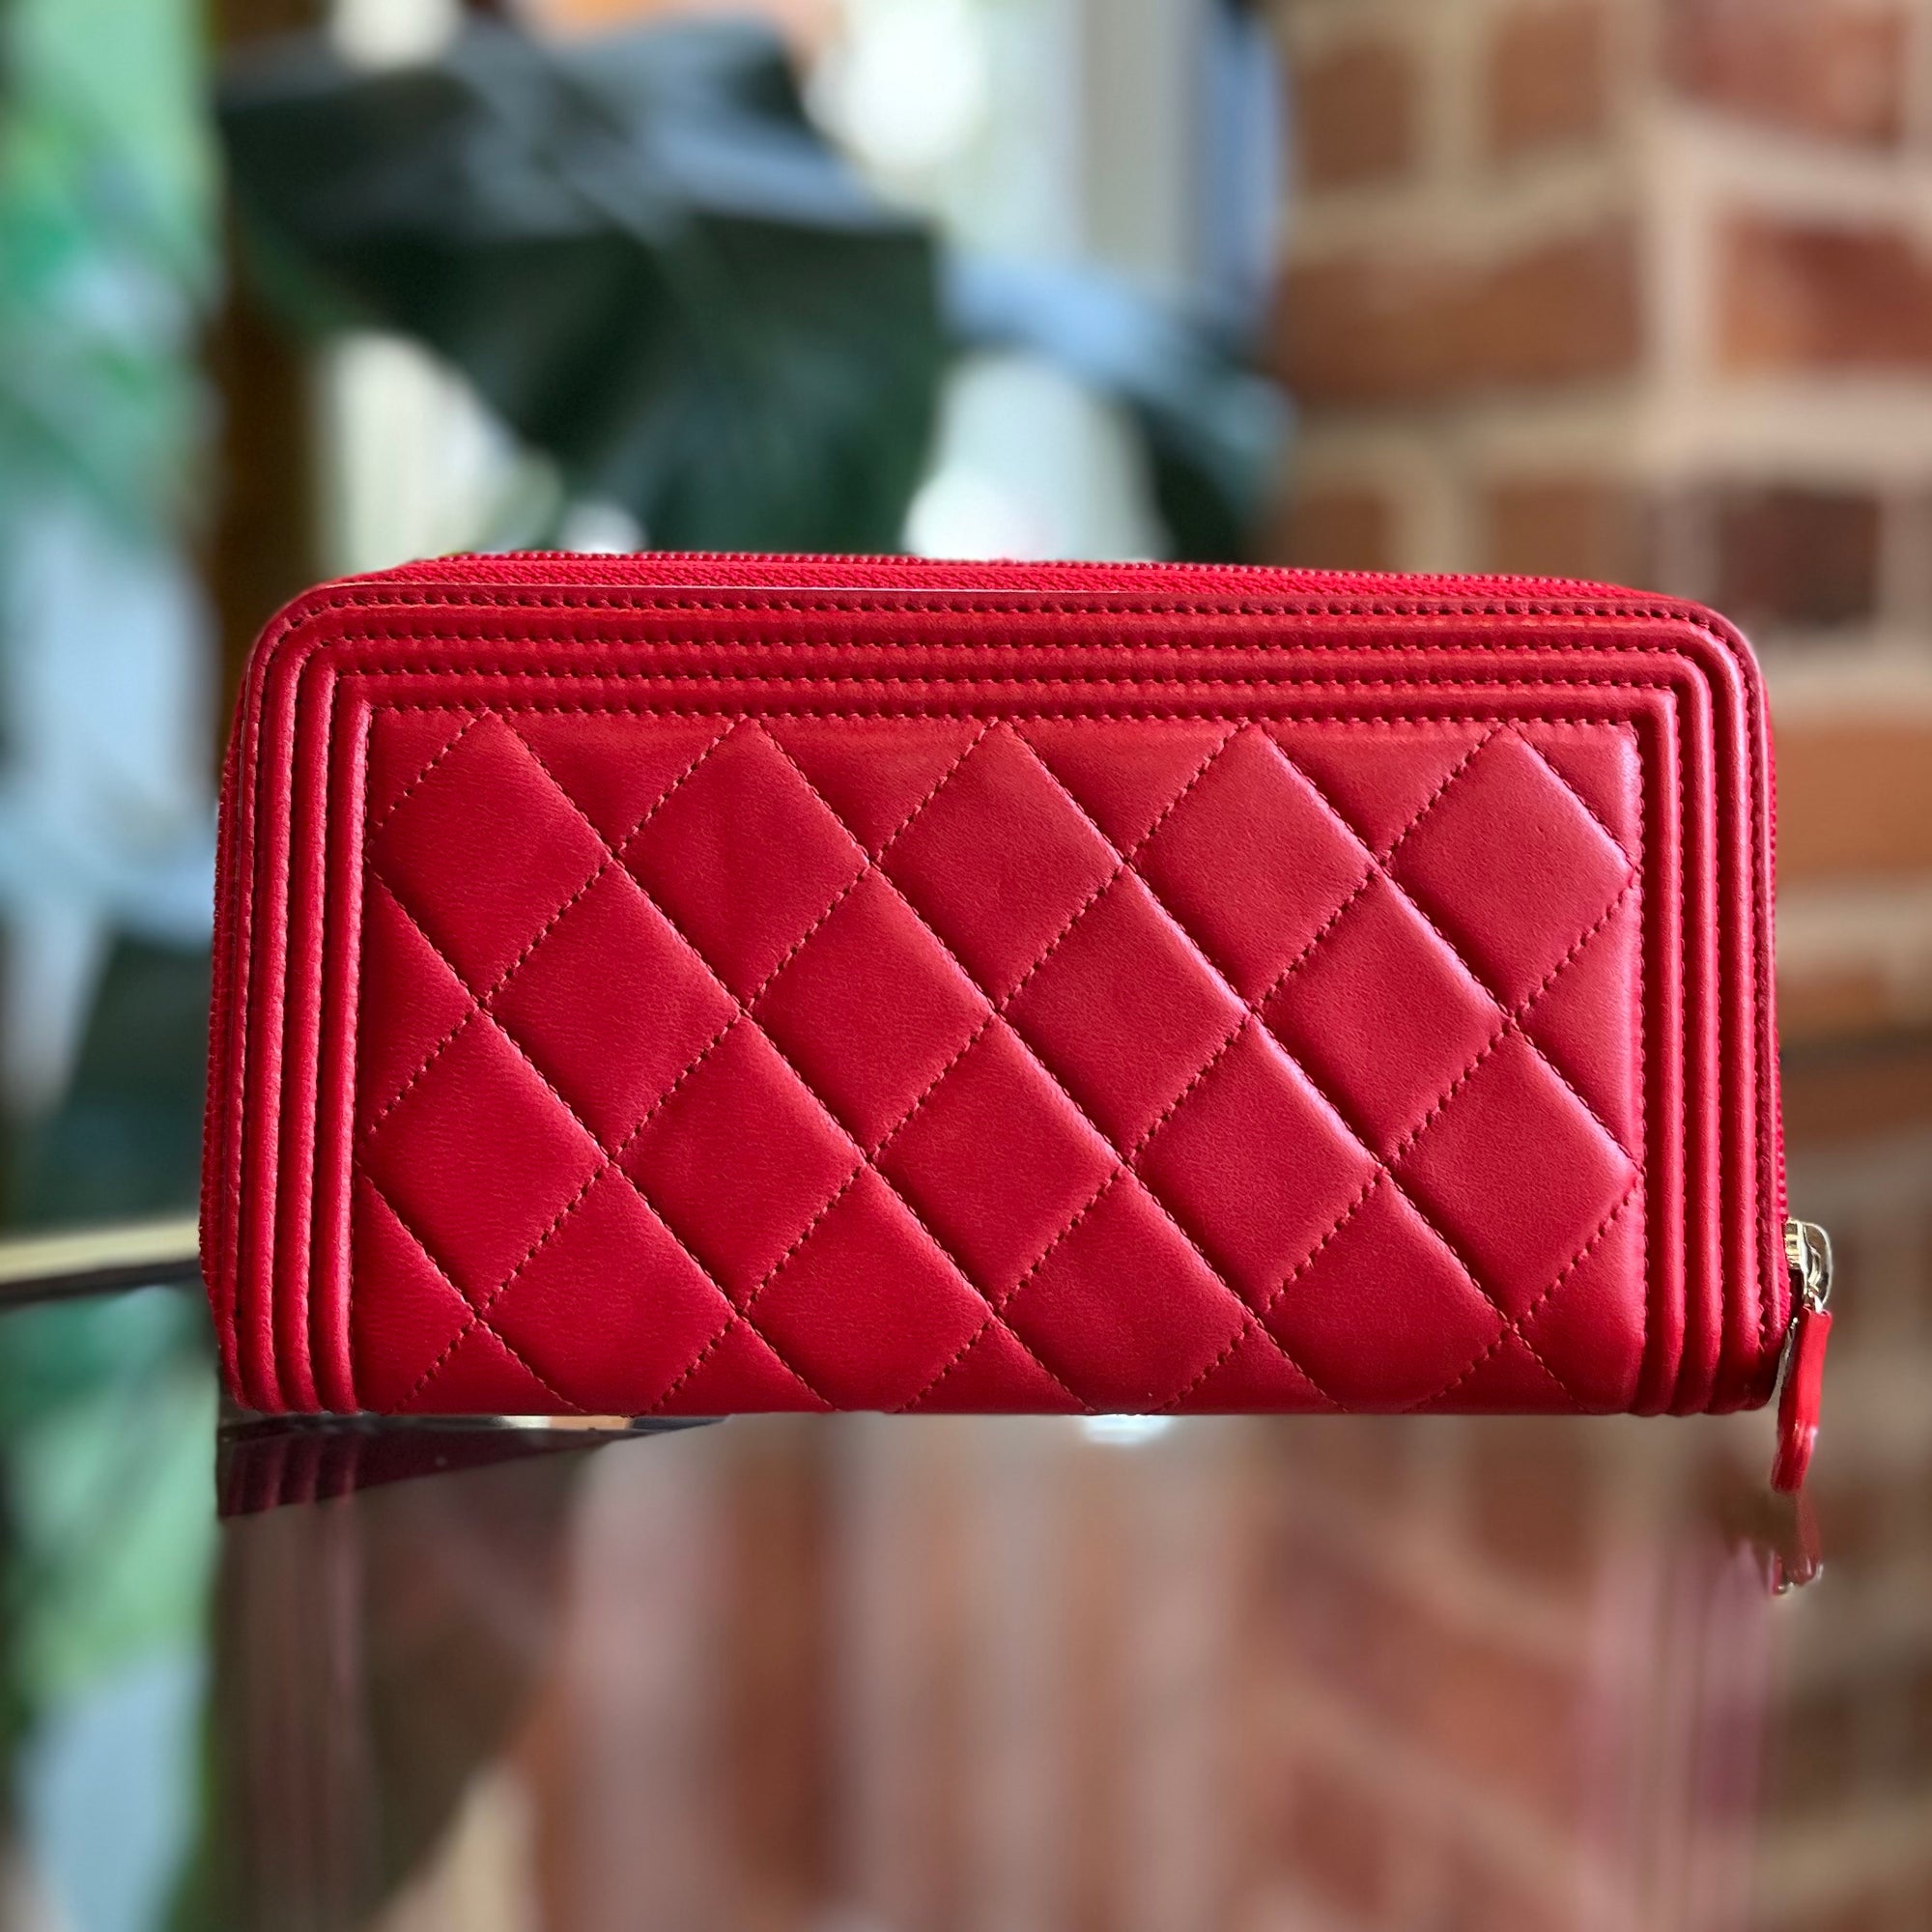 CHANEL Red Quilted Lambskin Leather Boy Long Zipped Wallet NIB TS3197